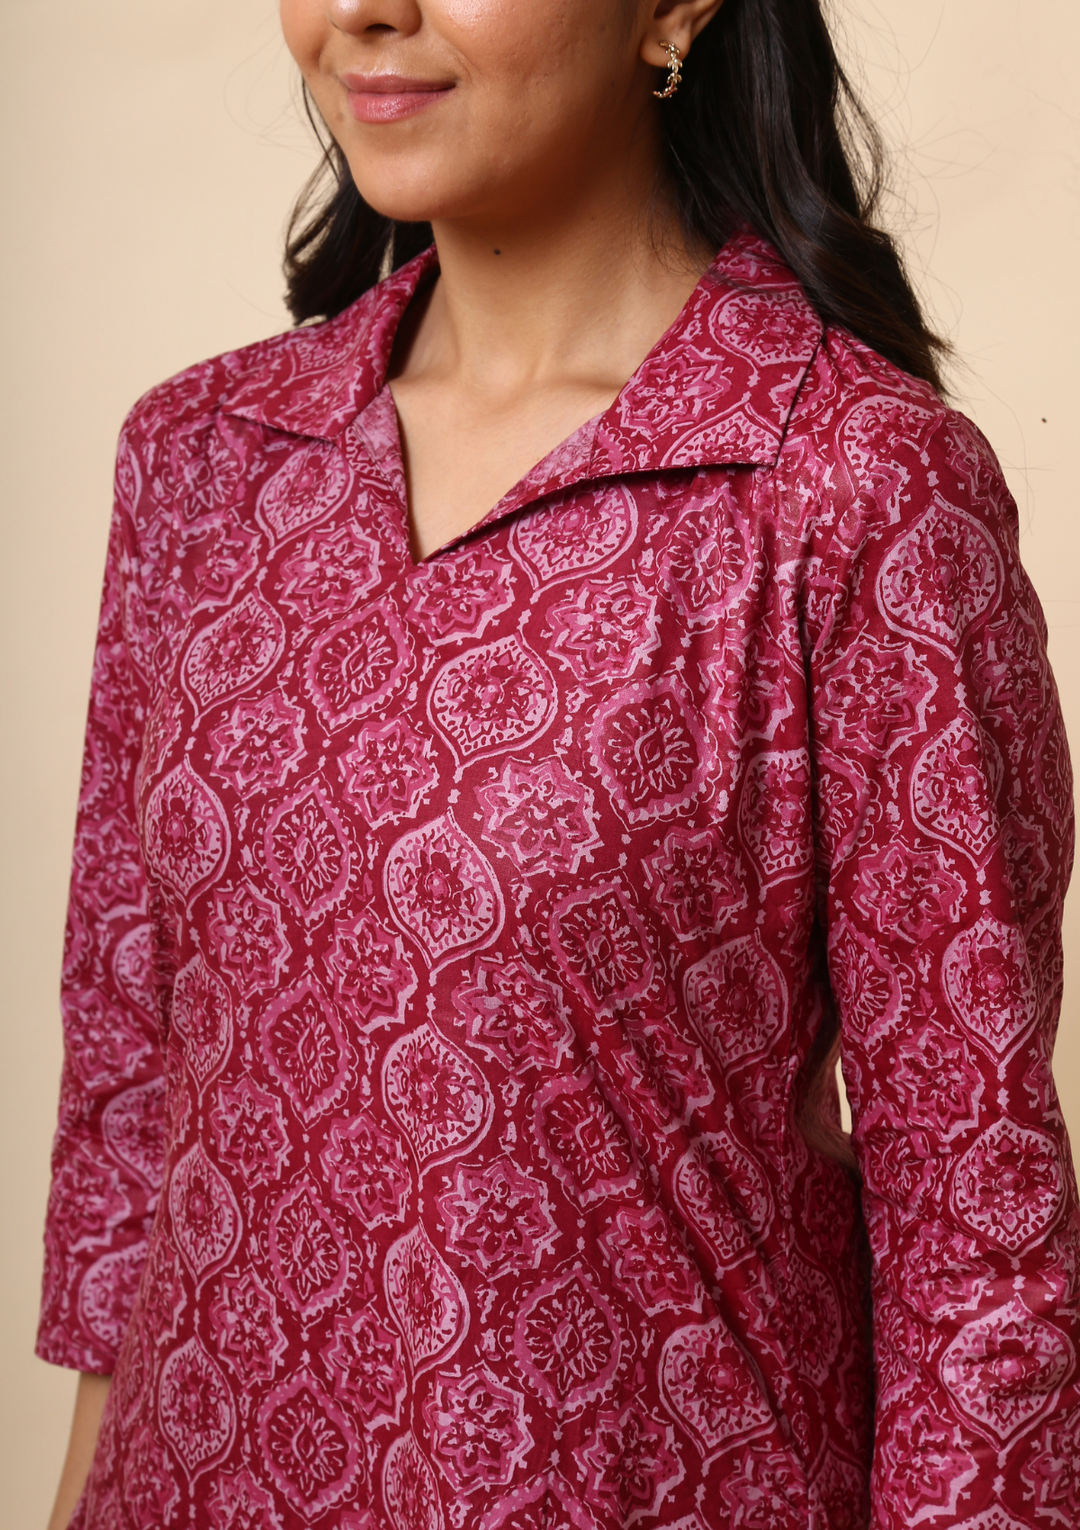 Ajrakh Print Palazzo Set of red colour made of high-quality cotton fabric and comfortable, stylish, and versatile.